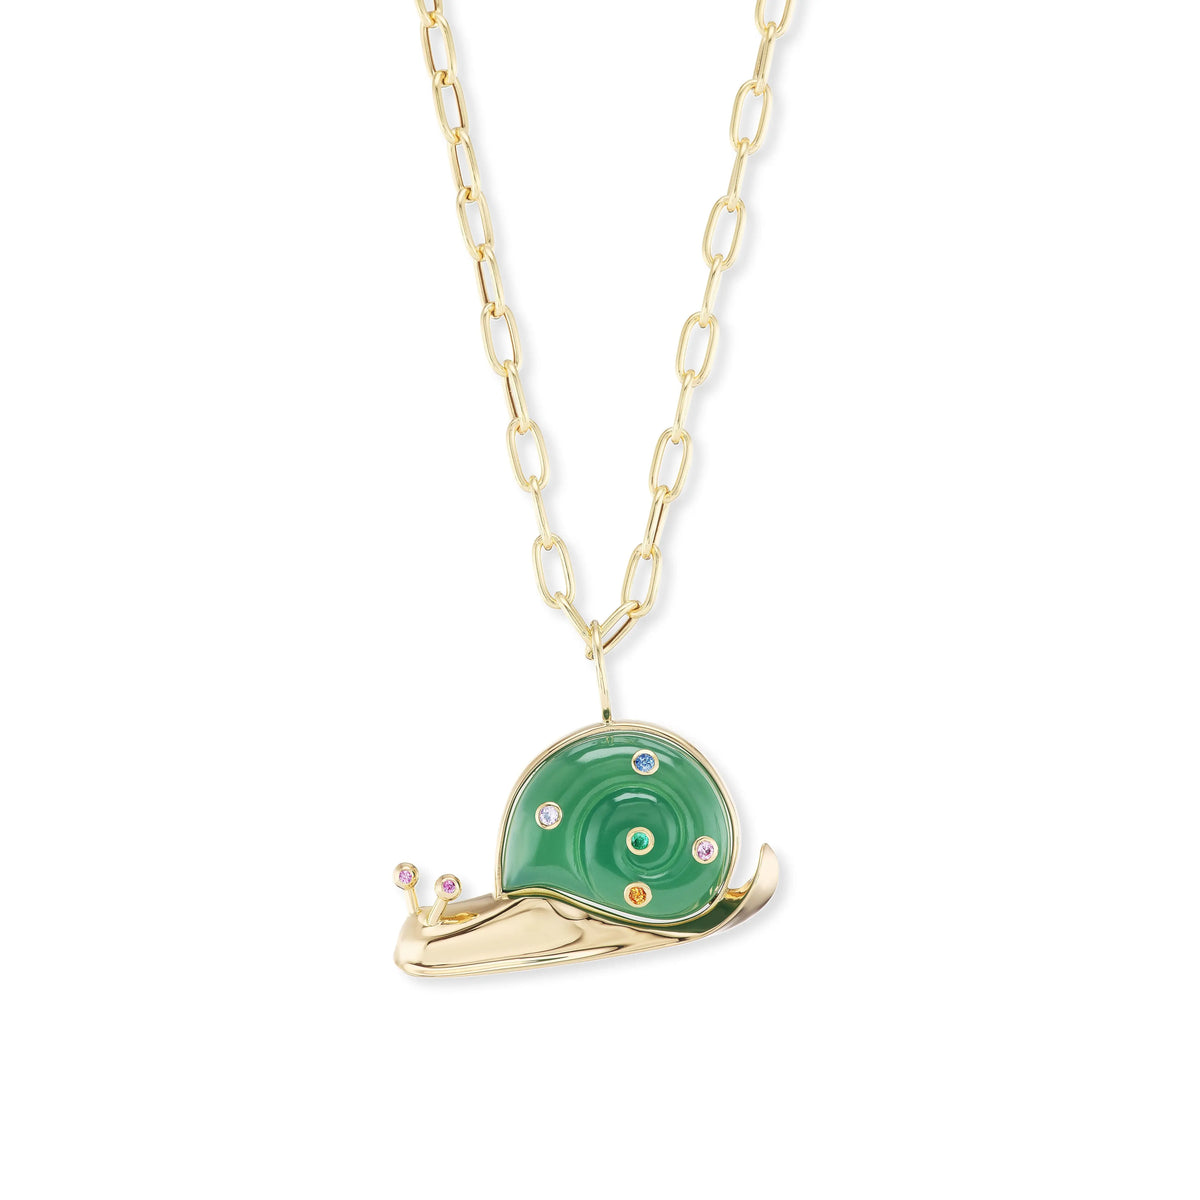 This is one of a kind pendant! Made with 18K yellow gold with Green Agate and Multi Large Snail Pendant on 18&quot; Chain.  Designed by Brent Neale and made in New York